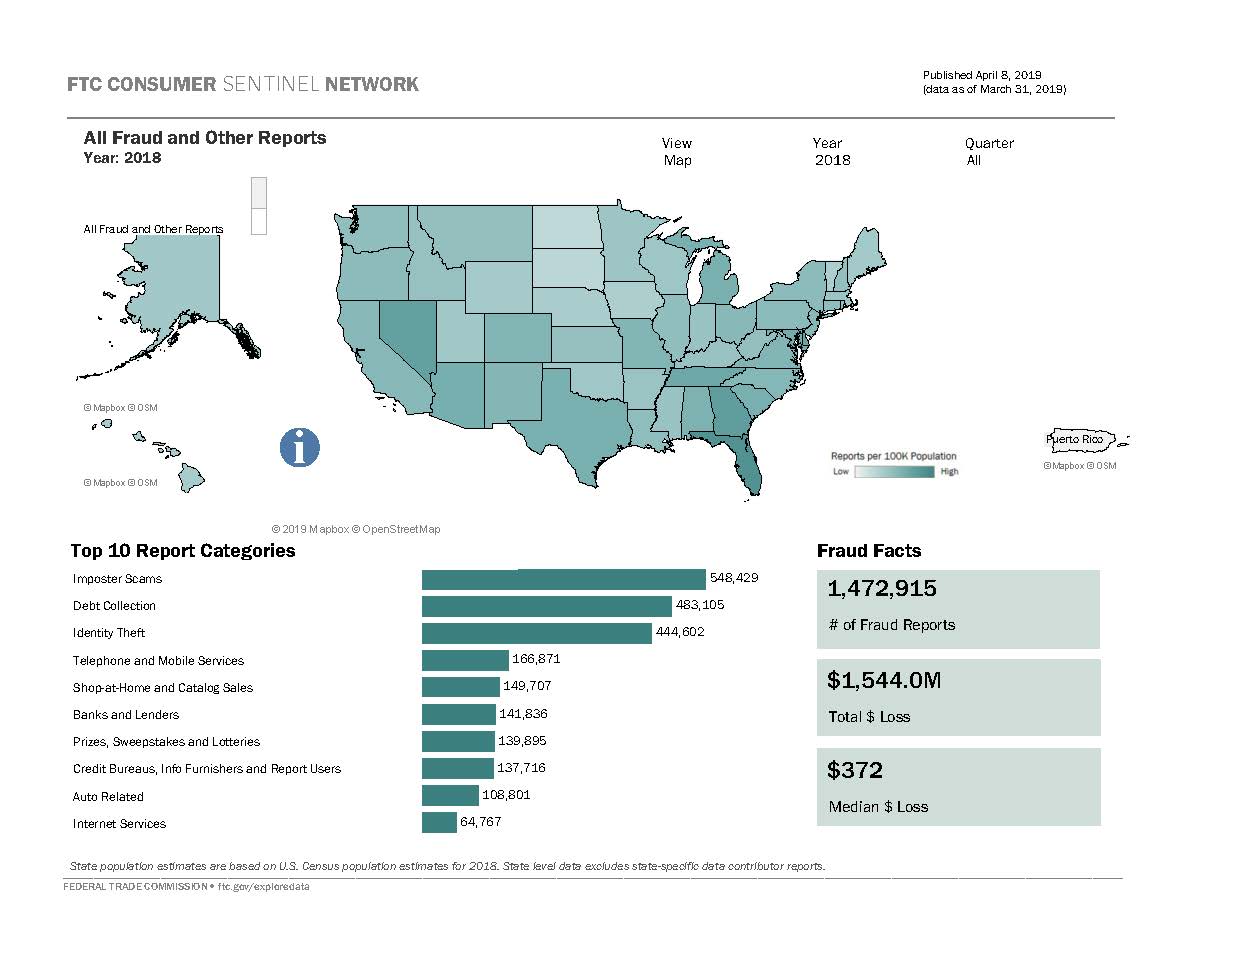 Link to interactive U.S. map and other visualizations showing fraud data by state based on consumer reports.